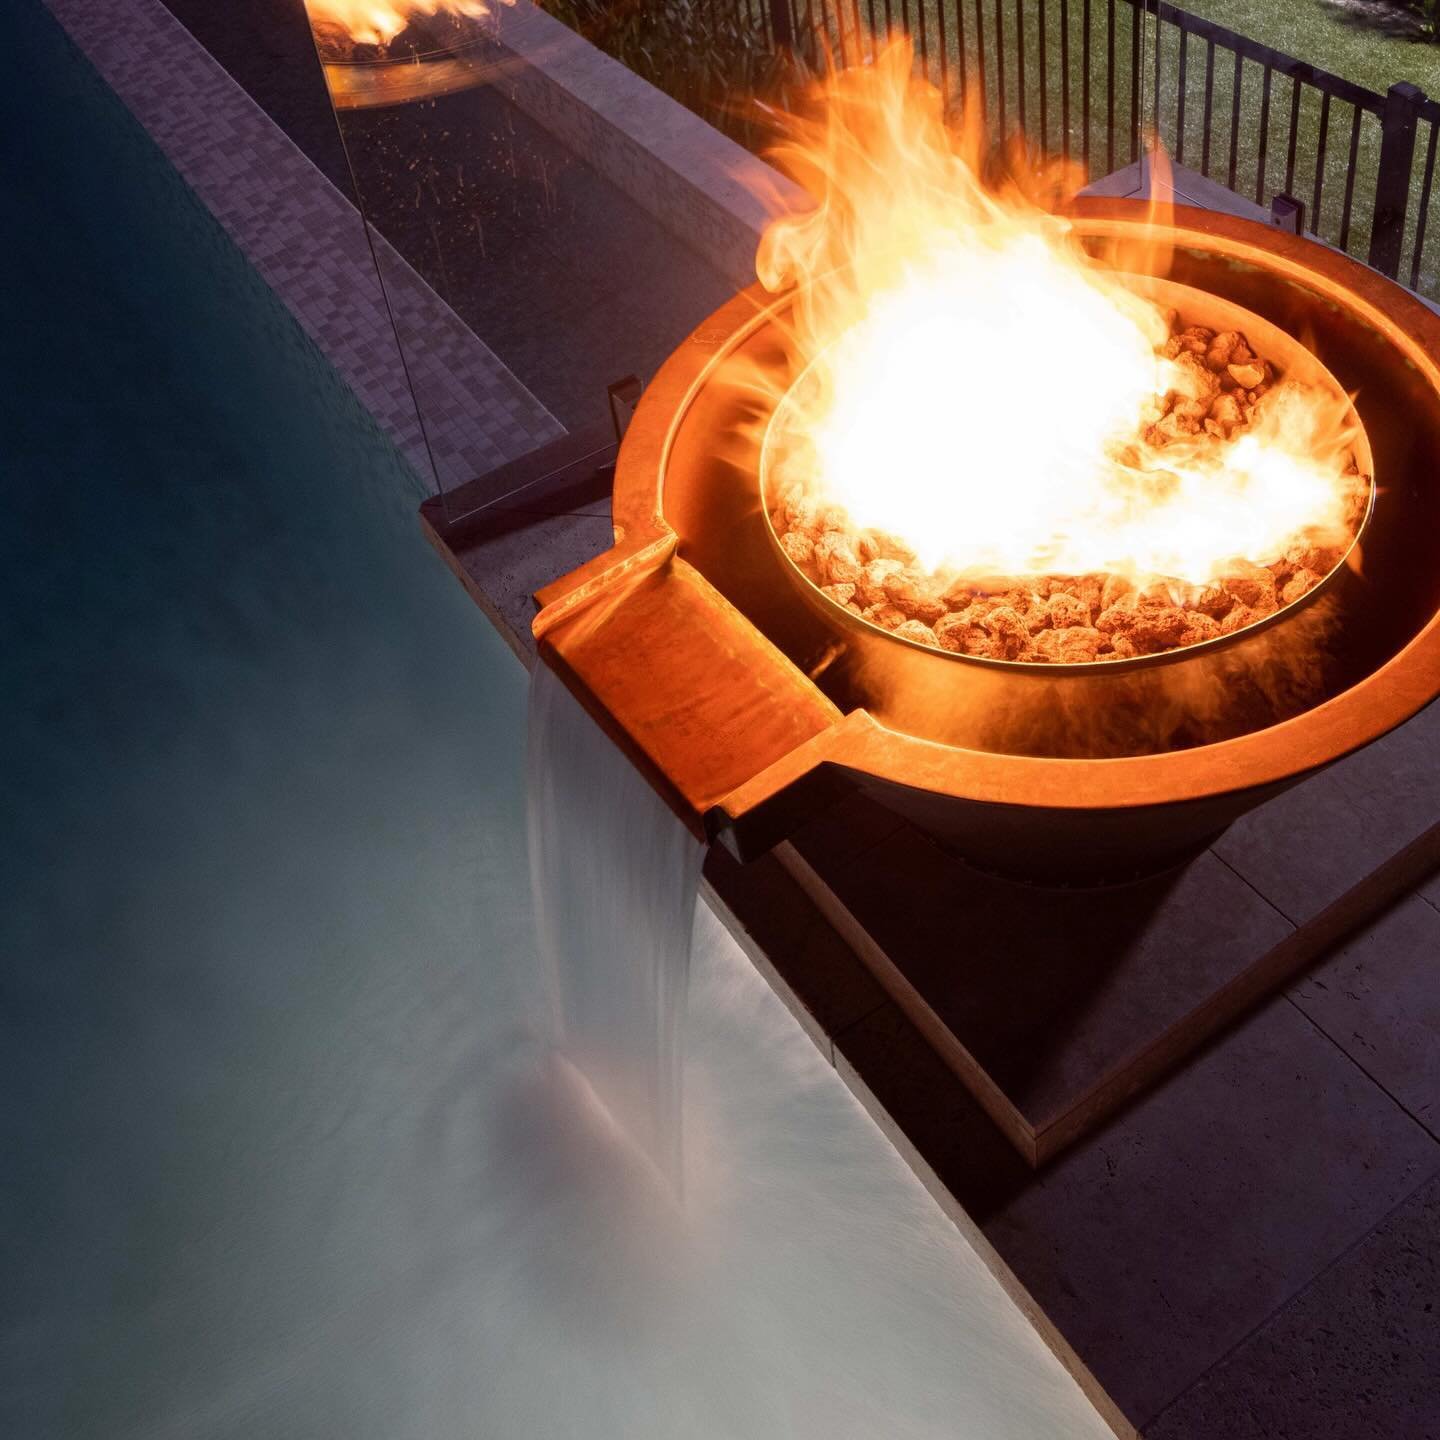 Looking for some stylish inspiration for outdoor warmth? Check out these beautiful copper fire bowls installed poolside in this acreage design. 
.
Outdoor living design by @fluidlandscapedesign 
Construction by @jakin_luxury_living 
.
#fire #firebowl